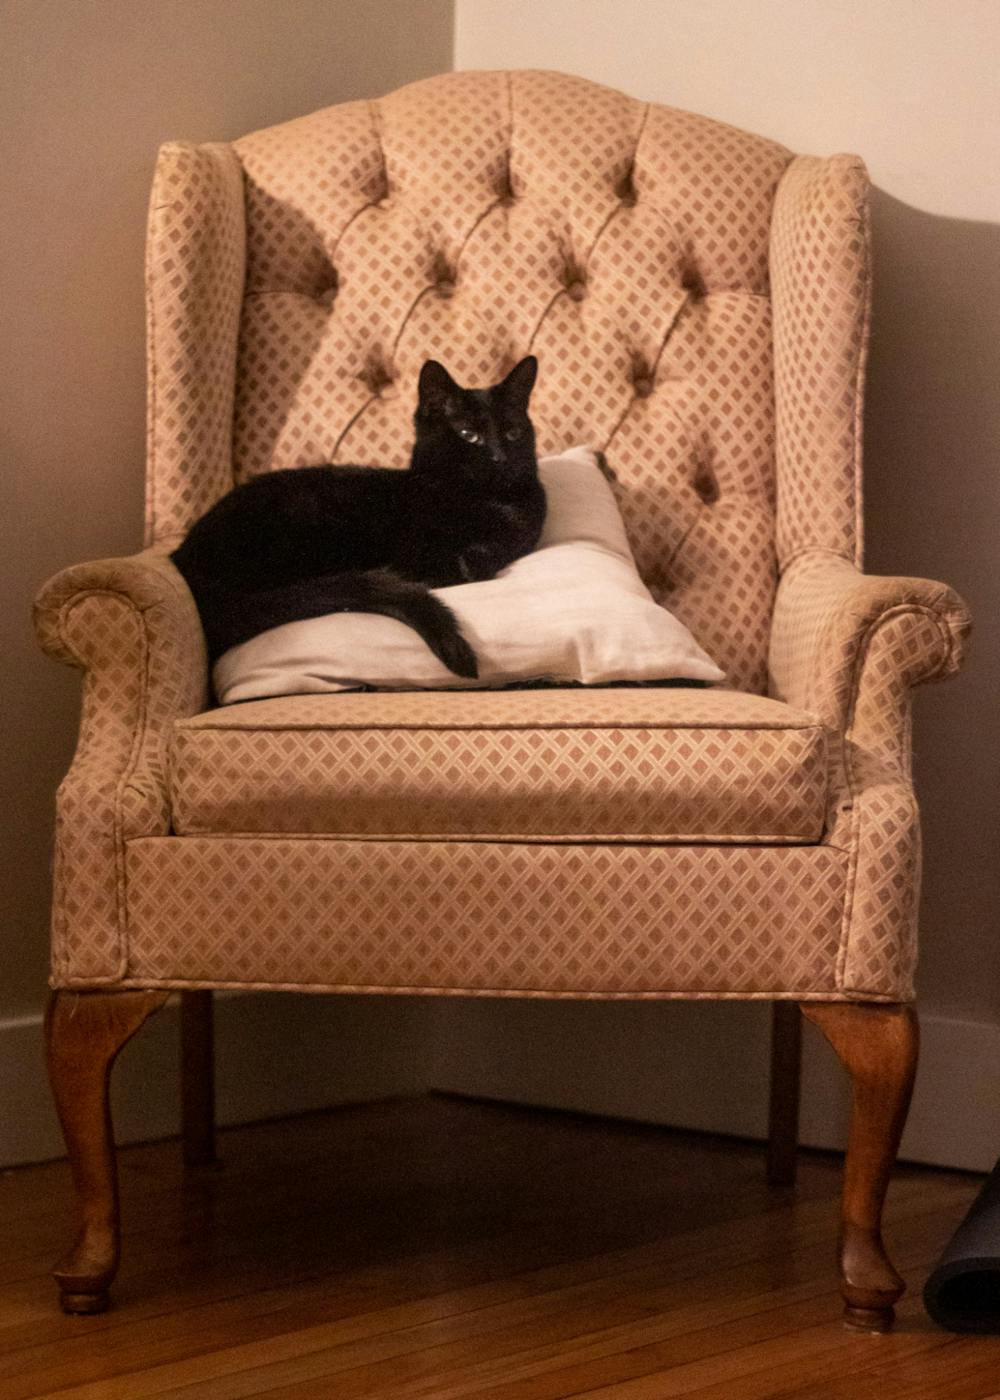 My friend Arlene's cat, Willow, sits in a chair.